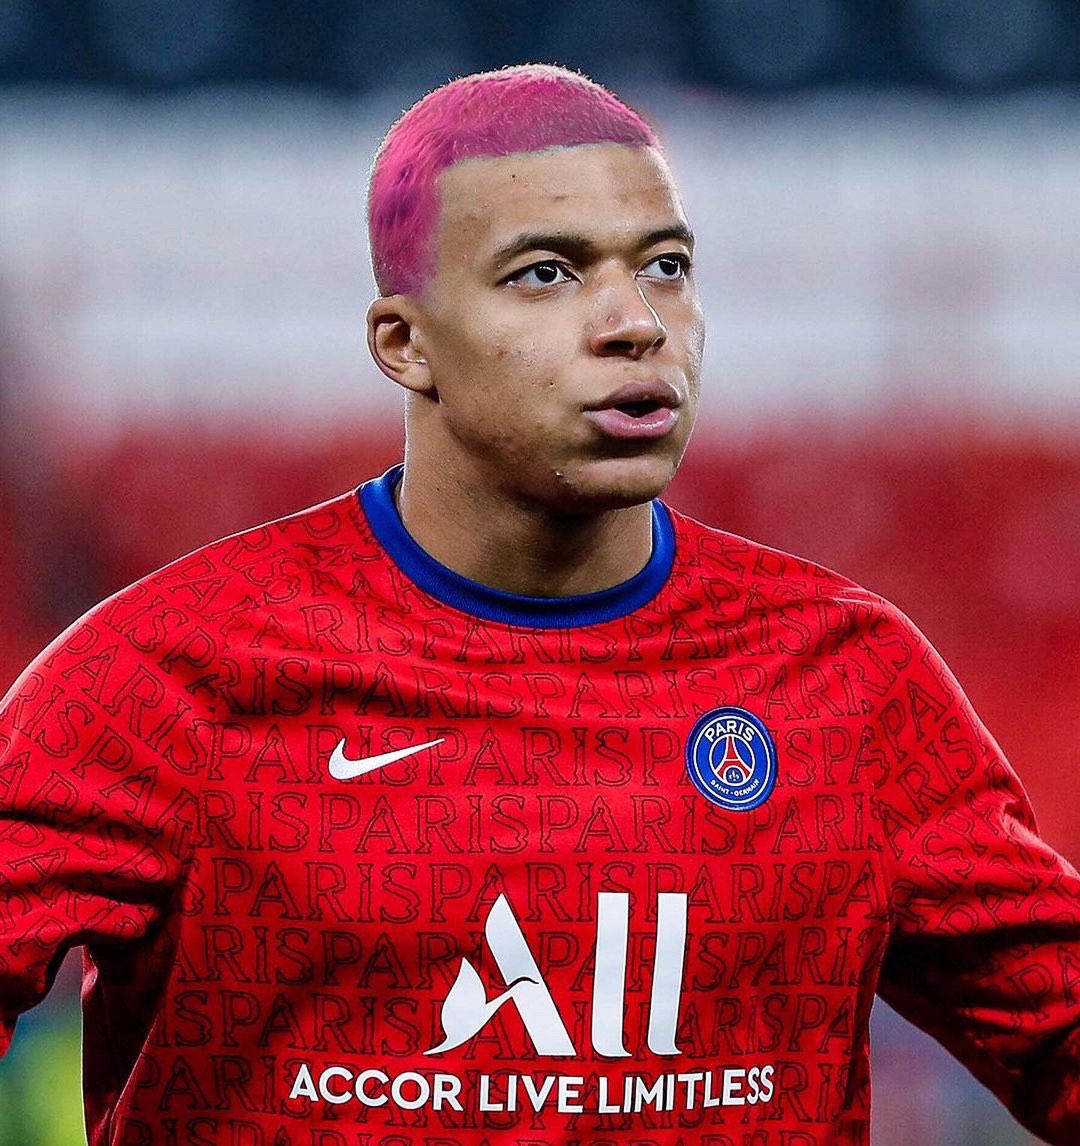 Janty on X: It's crazy how almost all of us remember that Mbappe